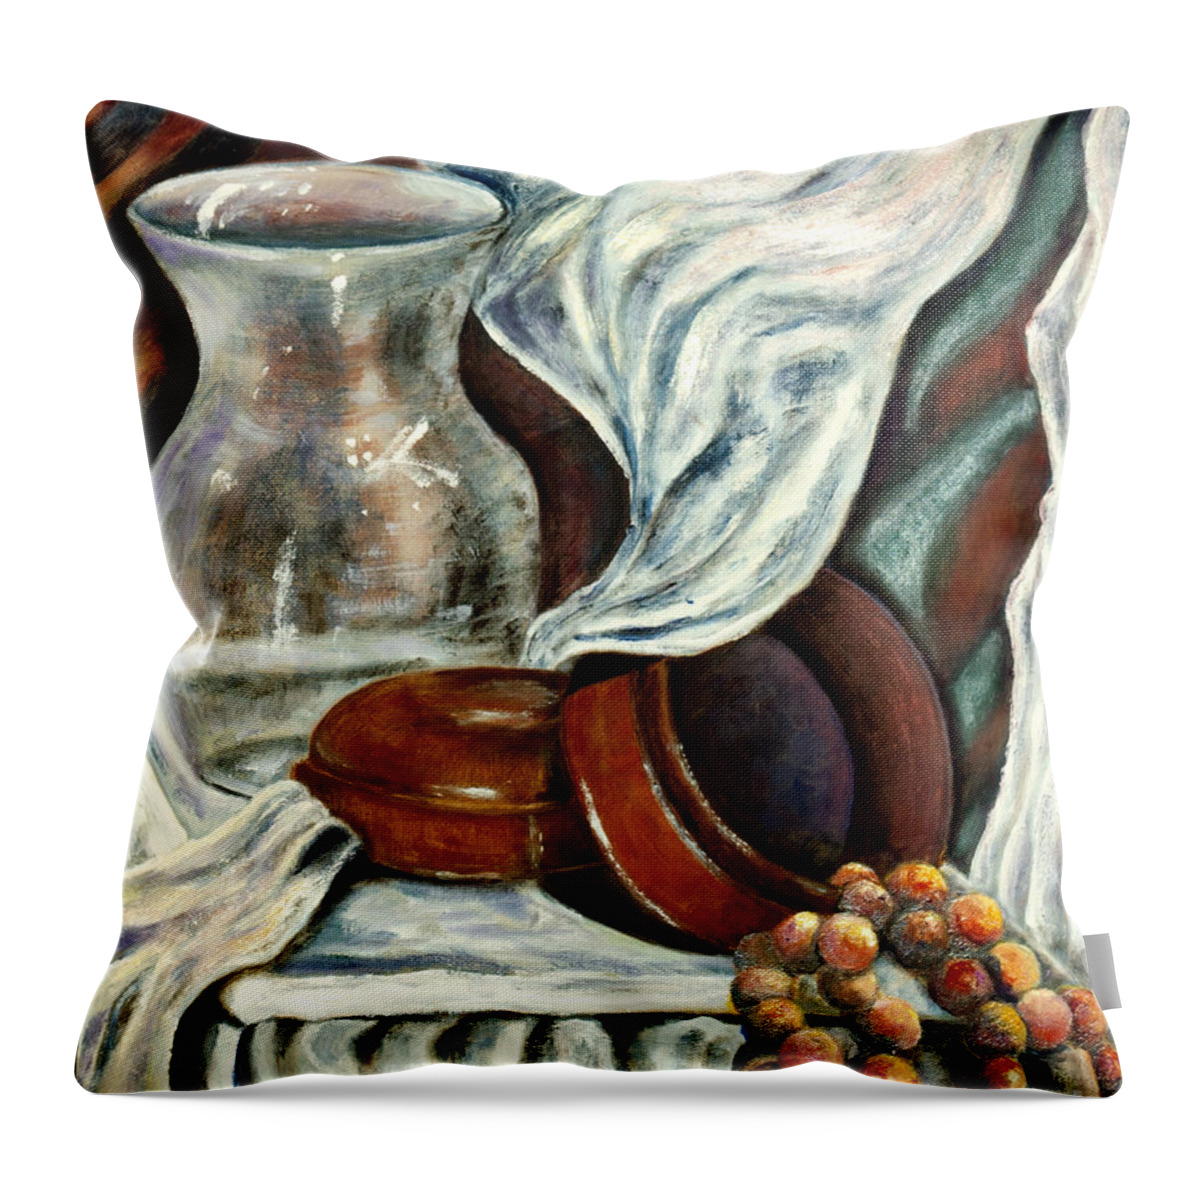 Cloth Throw Pillow featuring the painting 01298 Jewelry Box by AnneKarin Glass